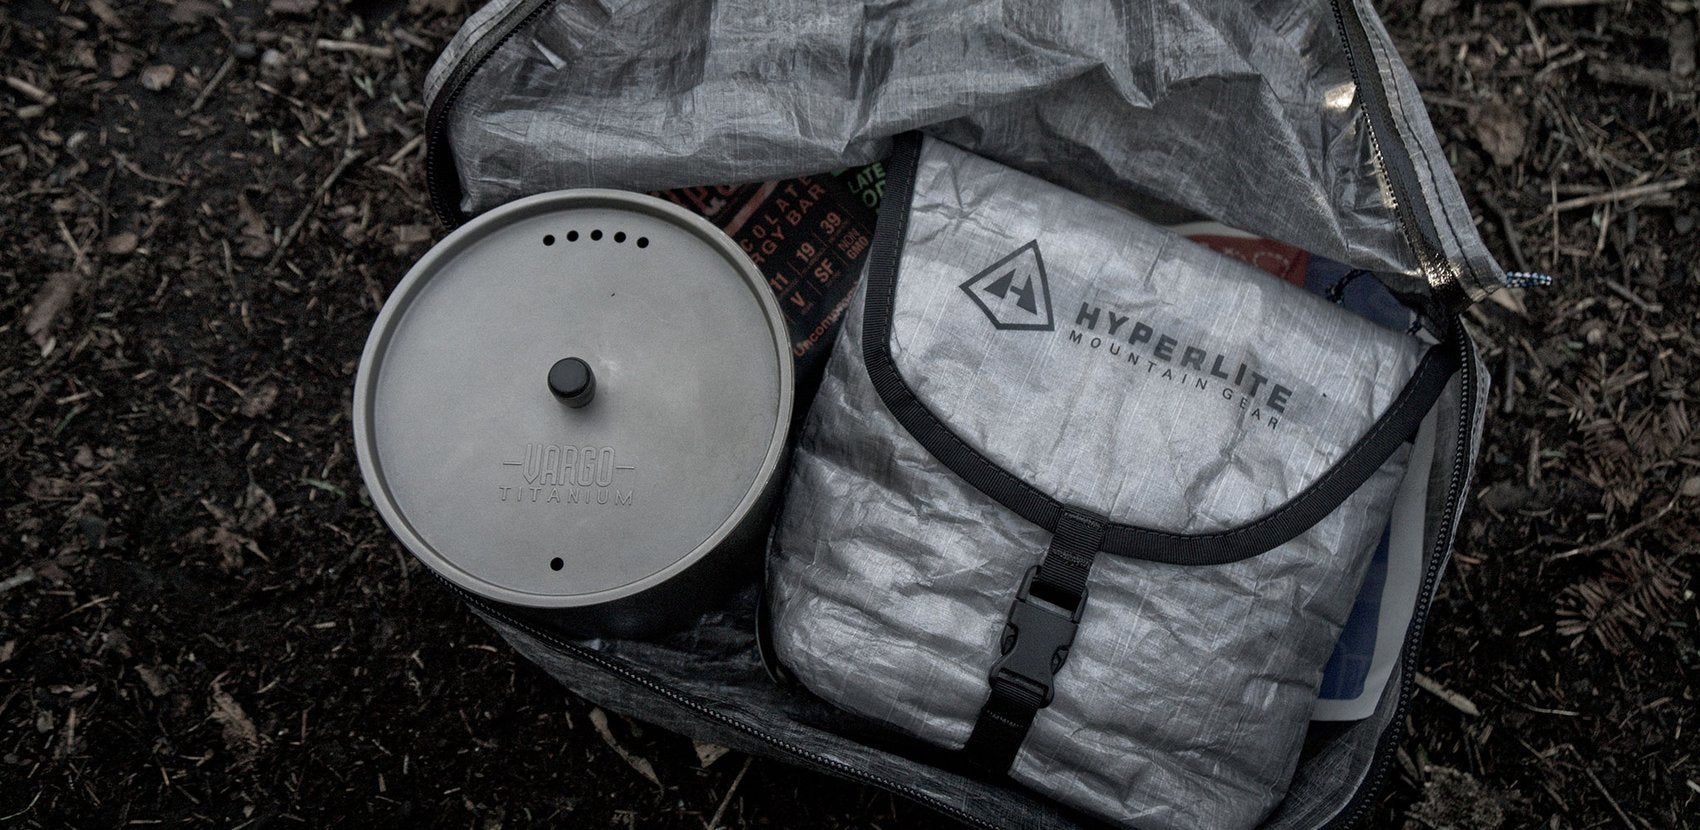 A backpack with a pot, pan, and utensils in it.